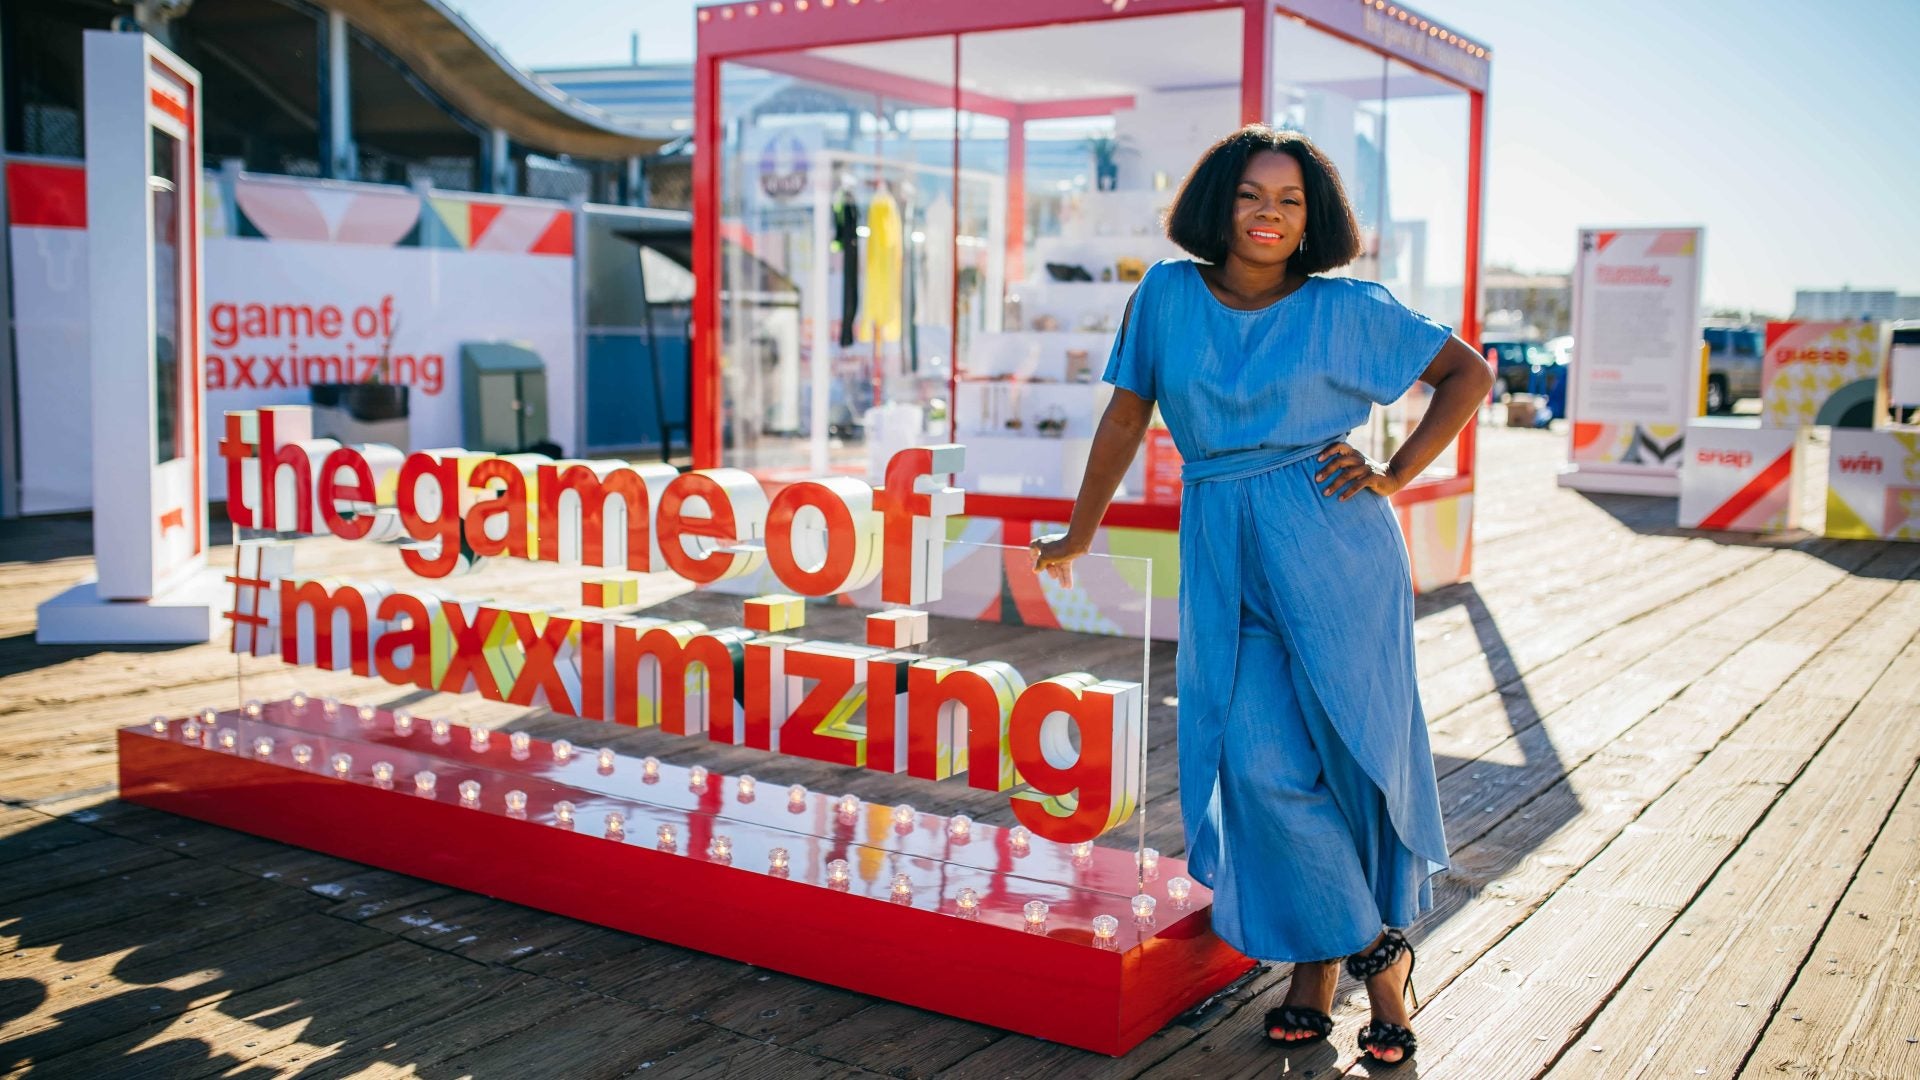 CurlBOX Founder Myleik Teele Teams Up With T.J. Maxx to Deliver Affordable Self-Care Moments